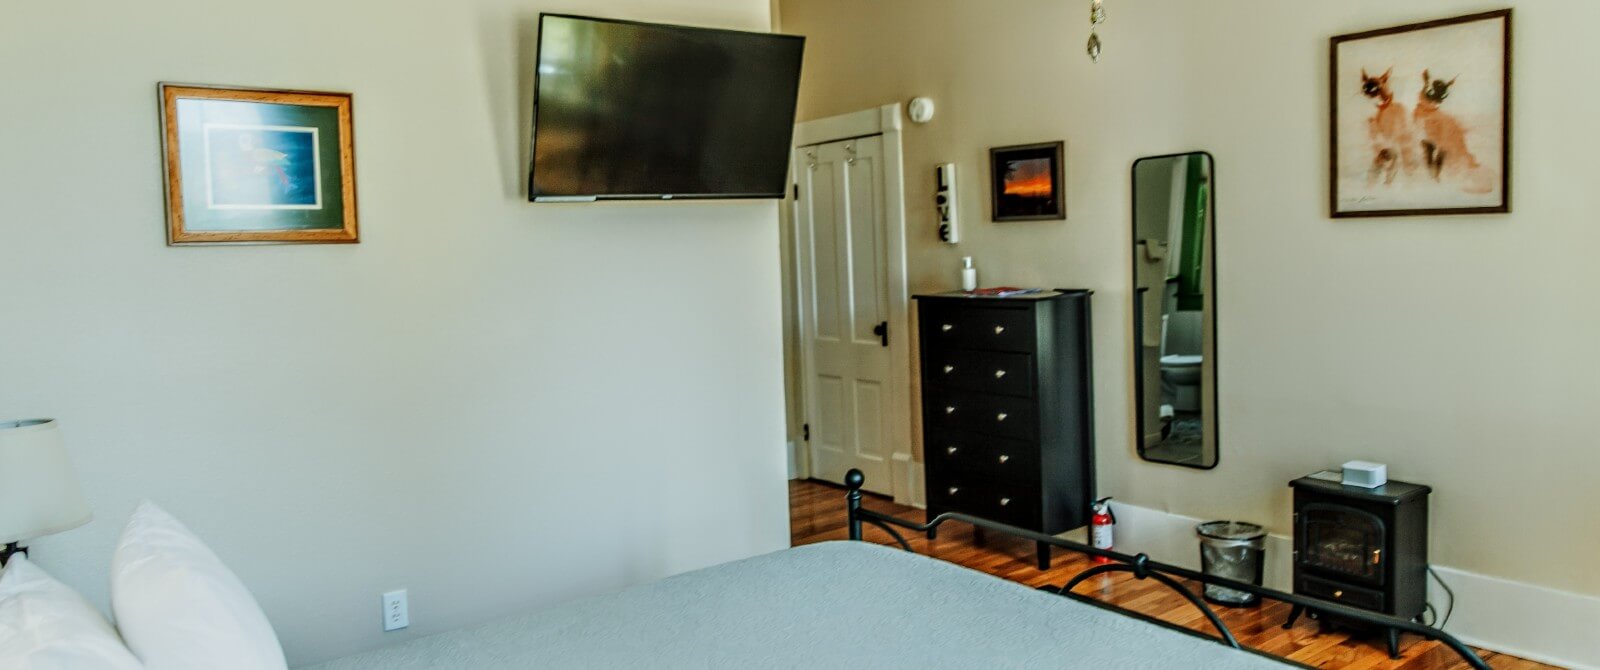 Bedroom with hardwood floors, black dresser and TV on the wall